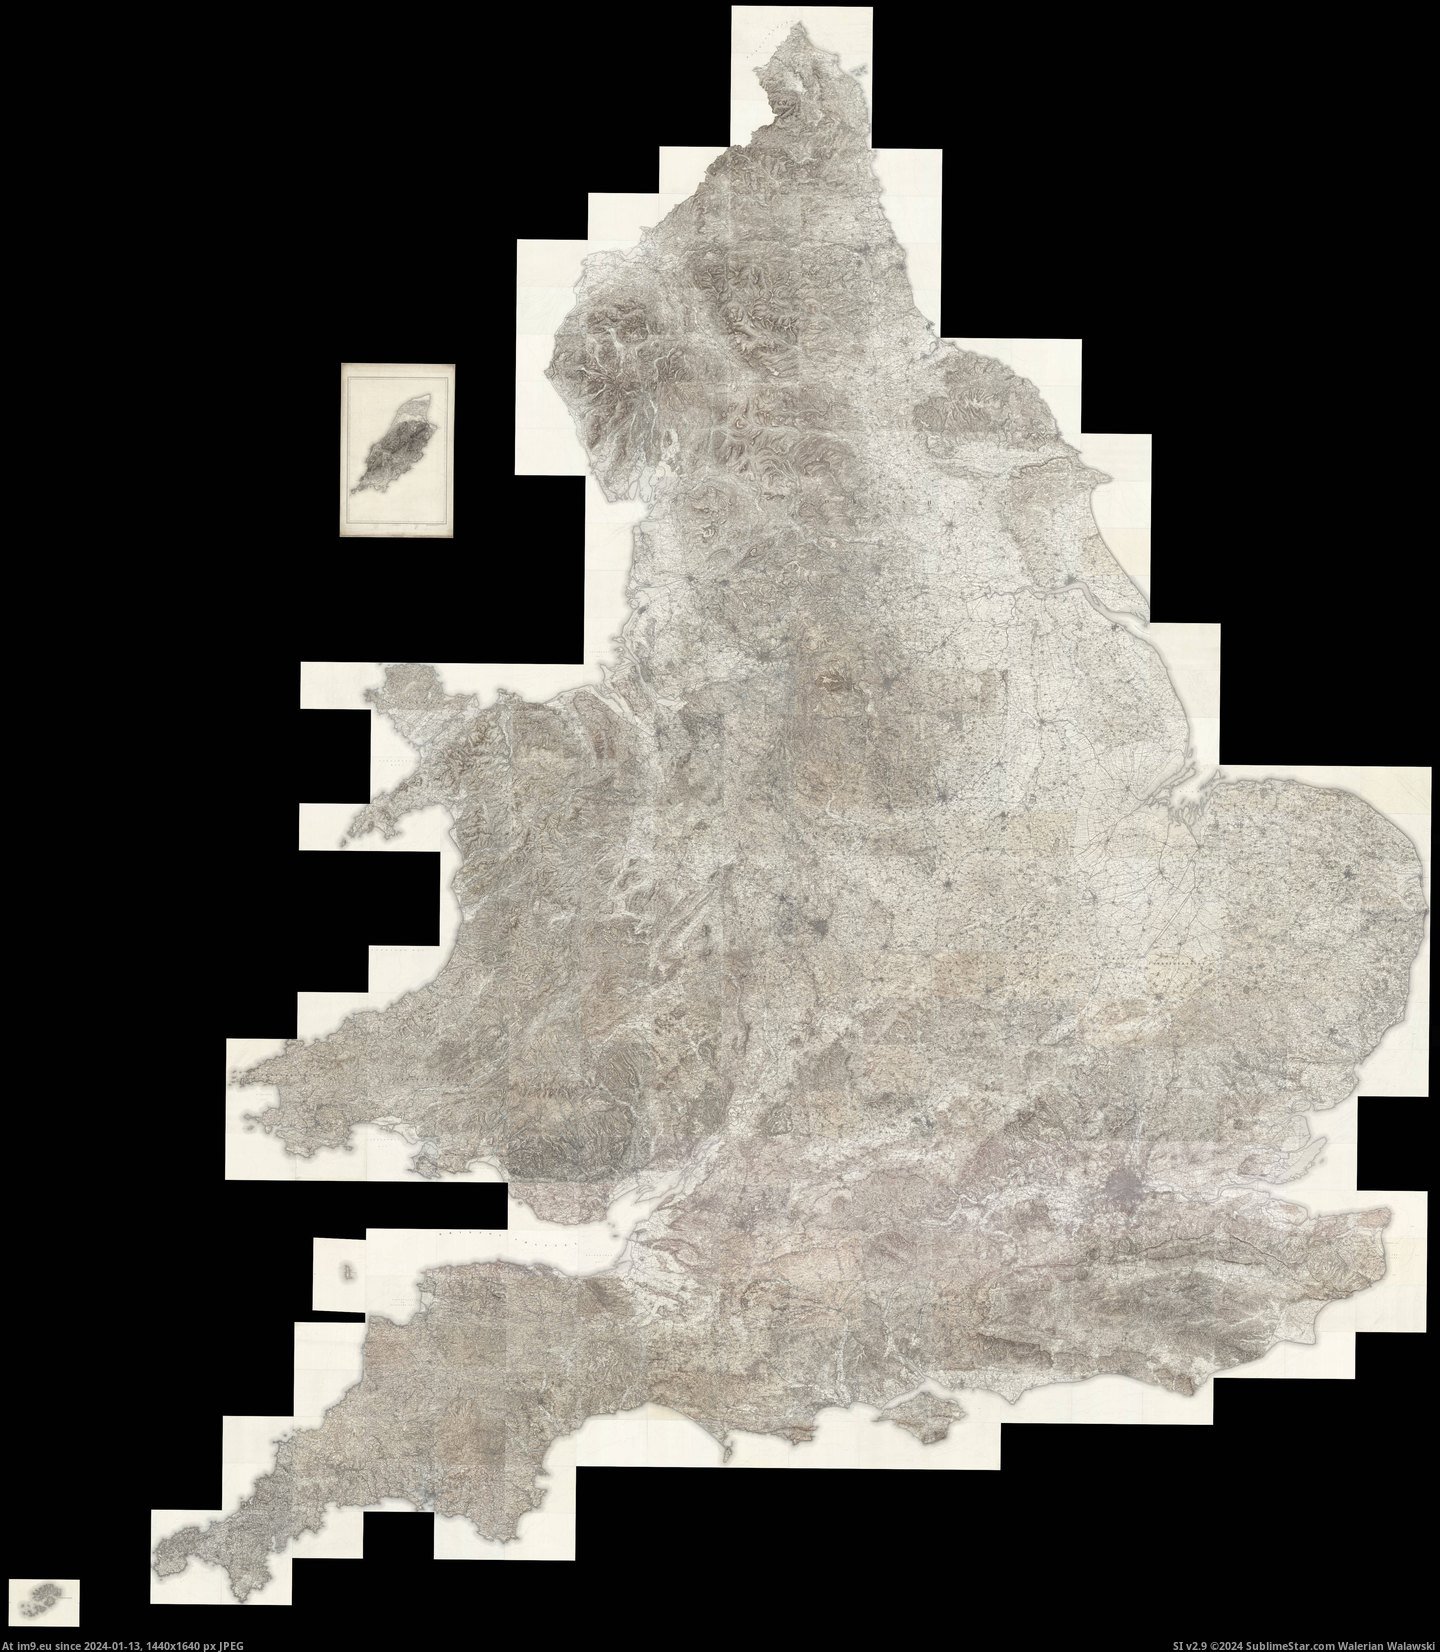 #High #Source #Map #Extremely #Composite #Zoomable #Seperate #England #Resolution #Maps [Mapporn] Composite map of England in 1900 made with 360 seperate maps. (Extremely high resolution zoomable source in comments,  Pic. (Image of album My r/MAPS favs))